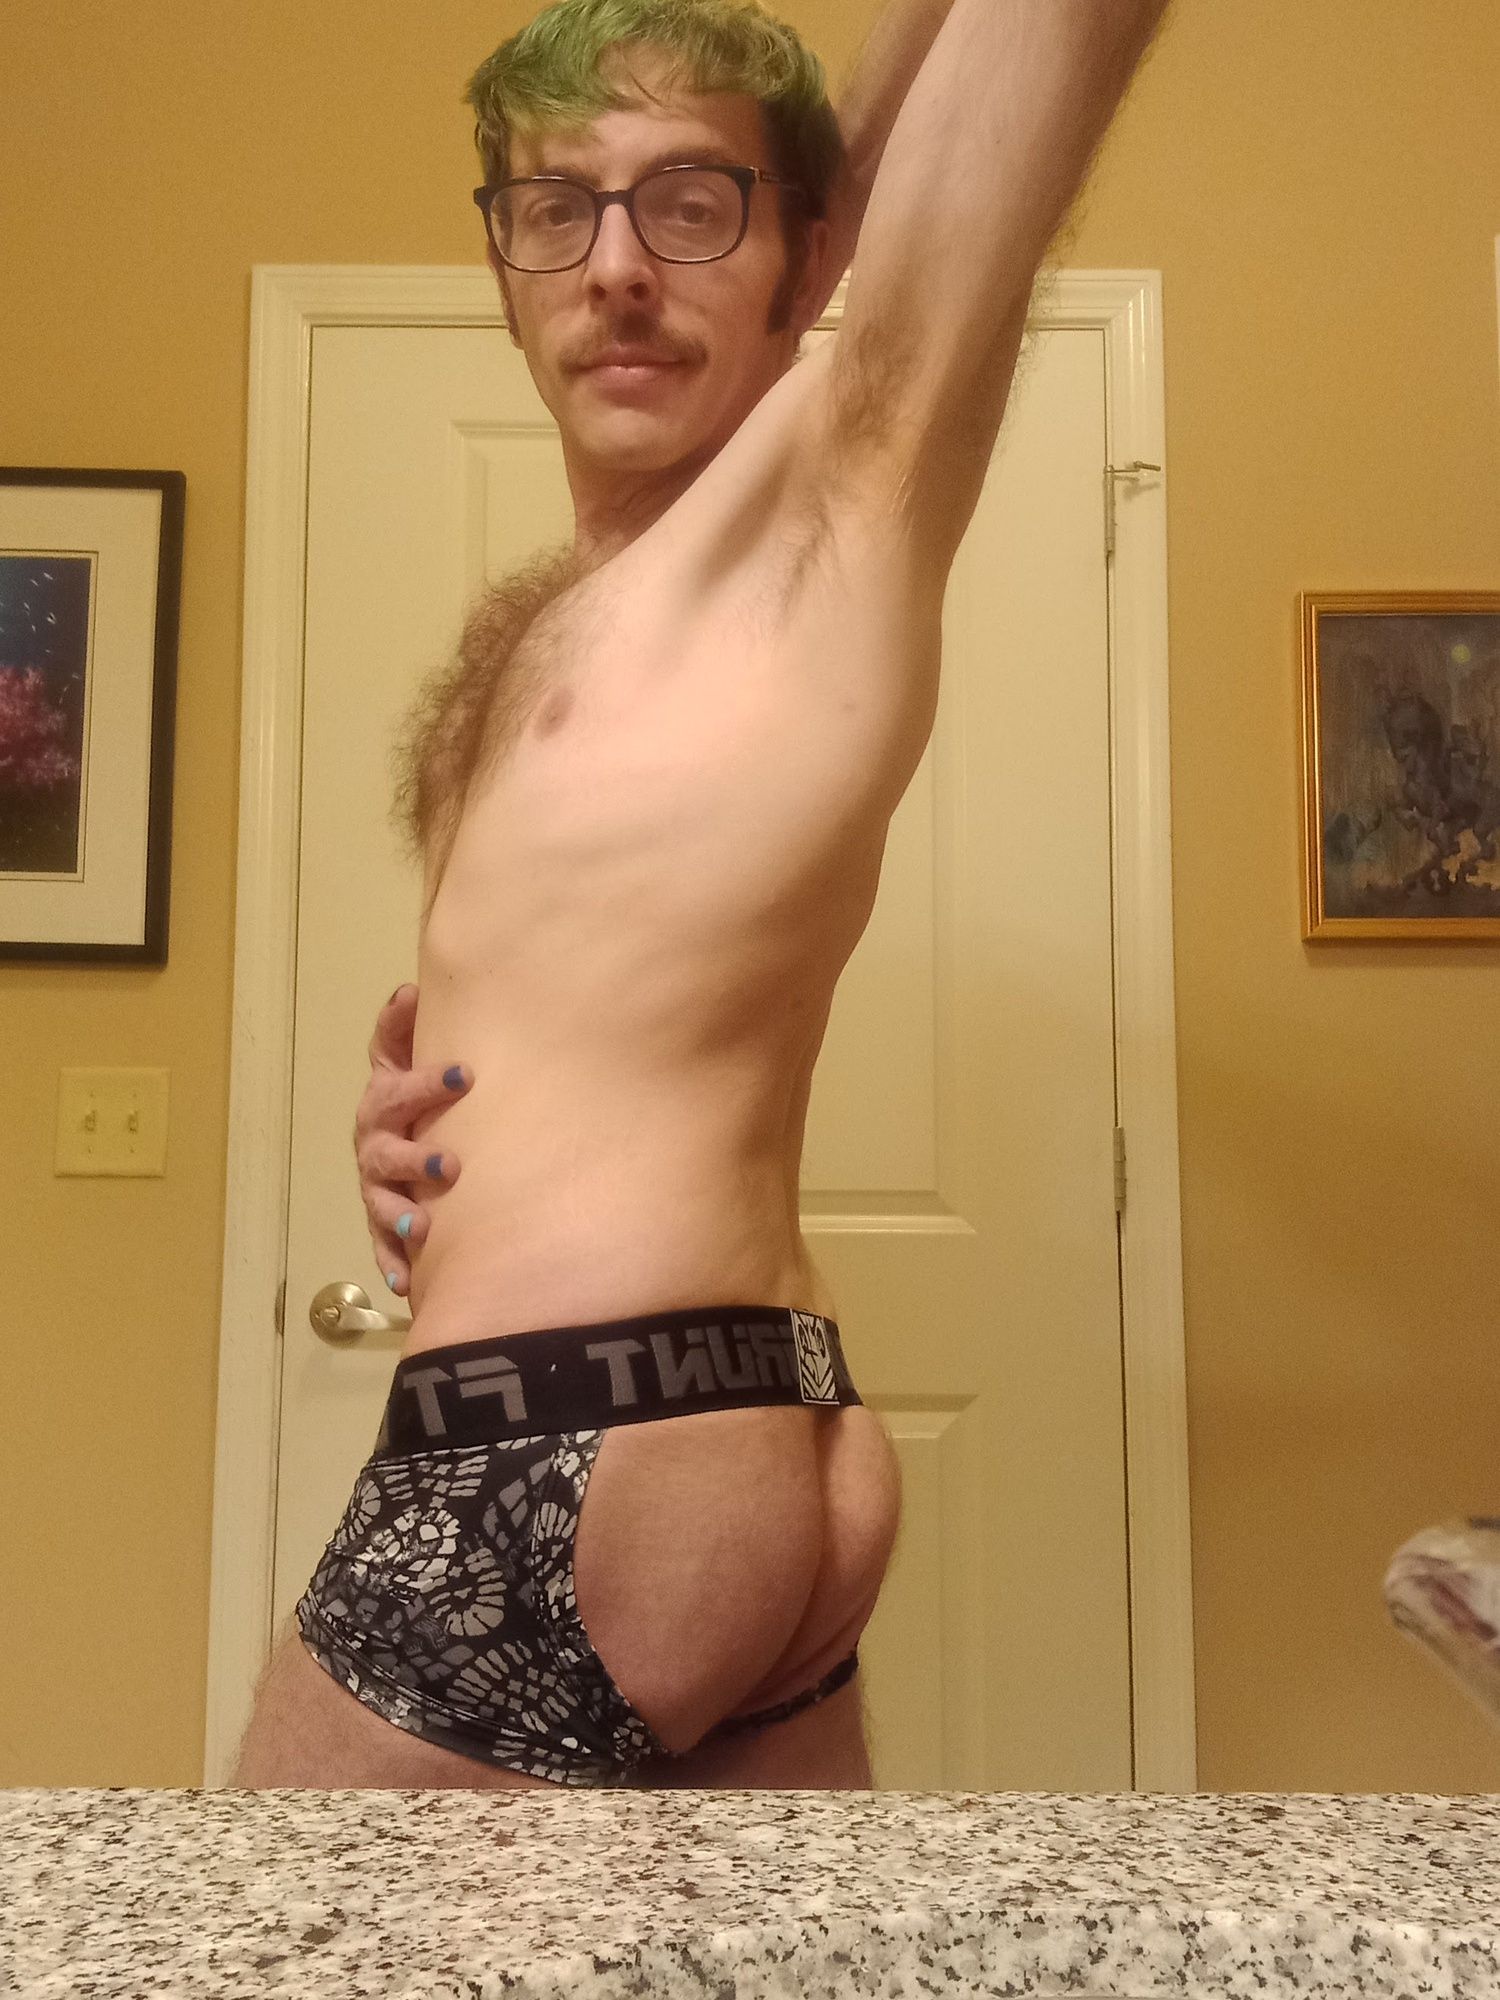 Puppers Showing off in underwear...again #48